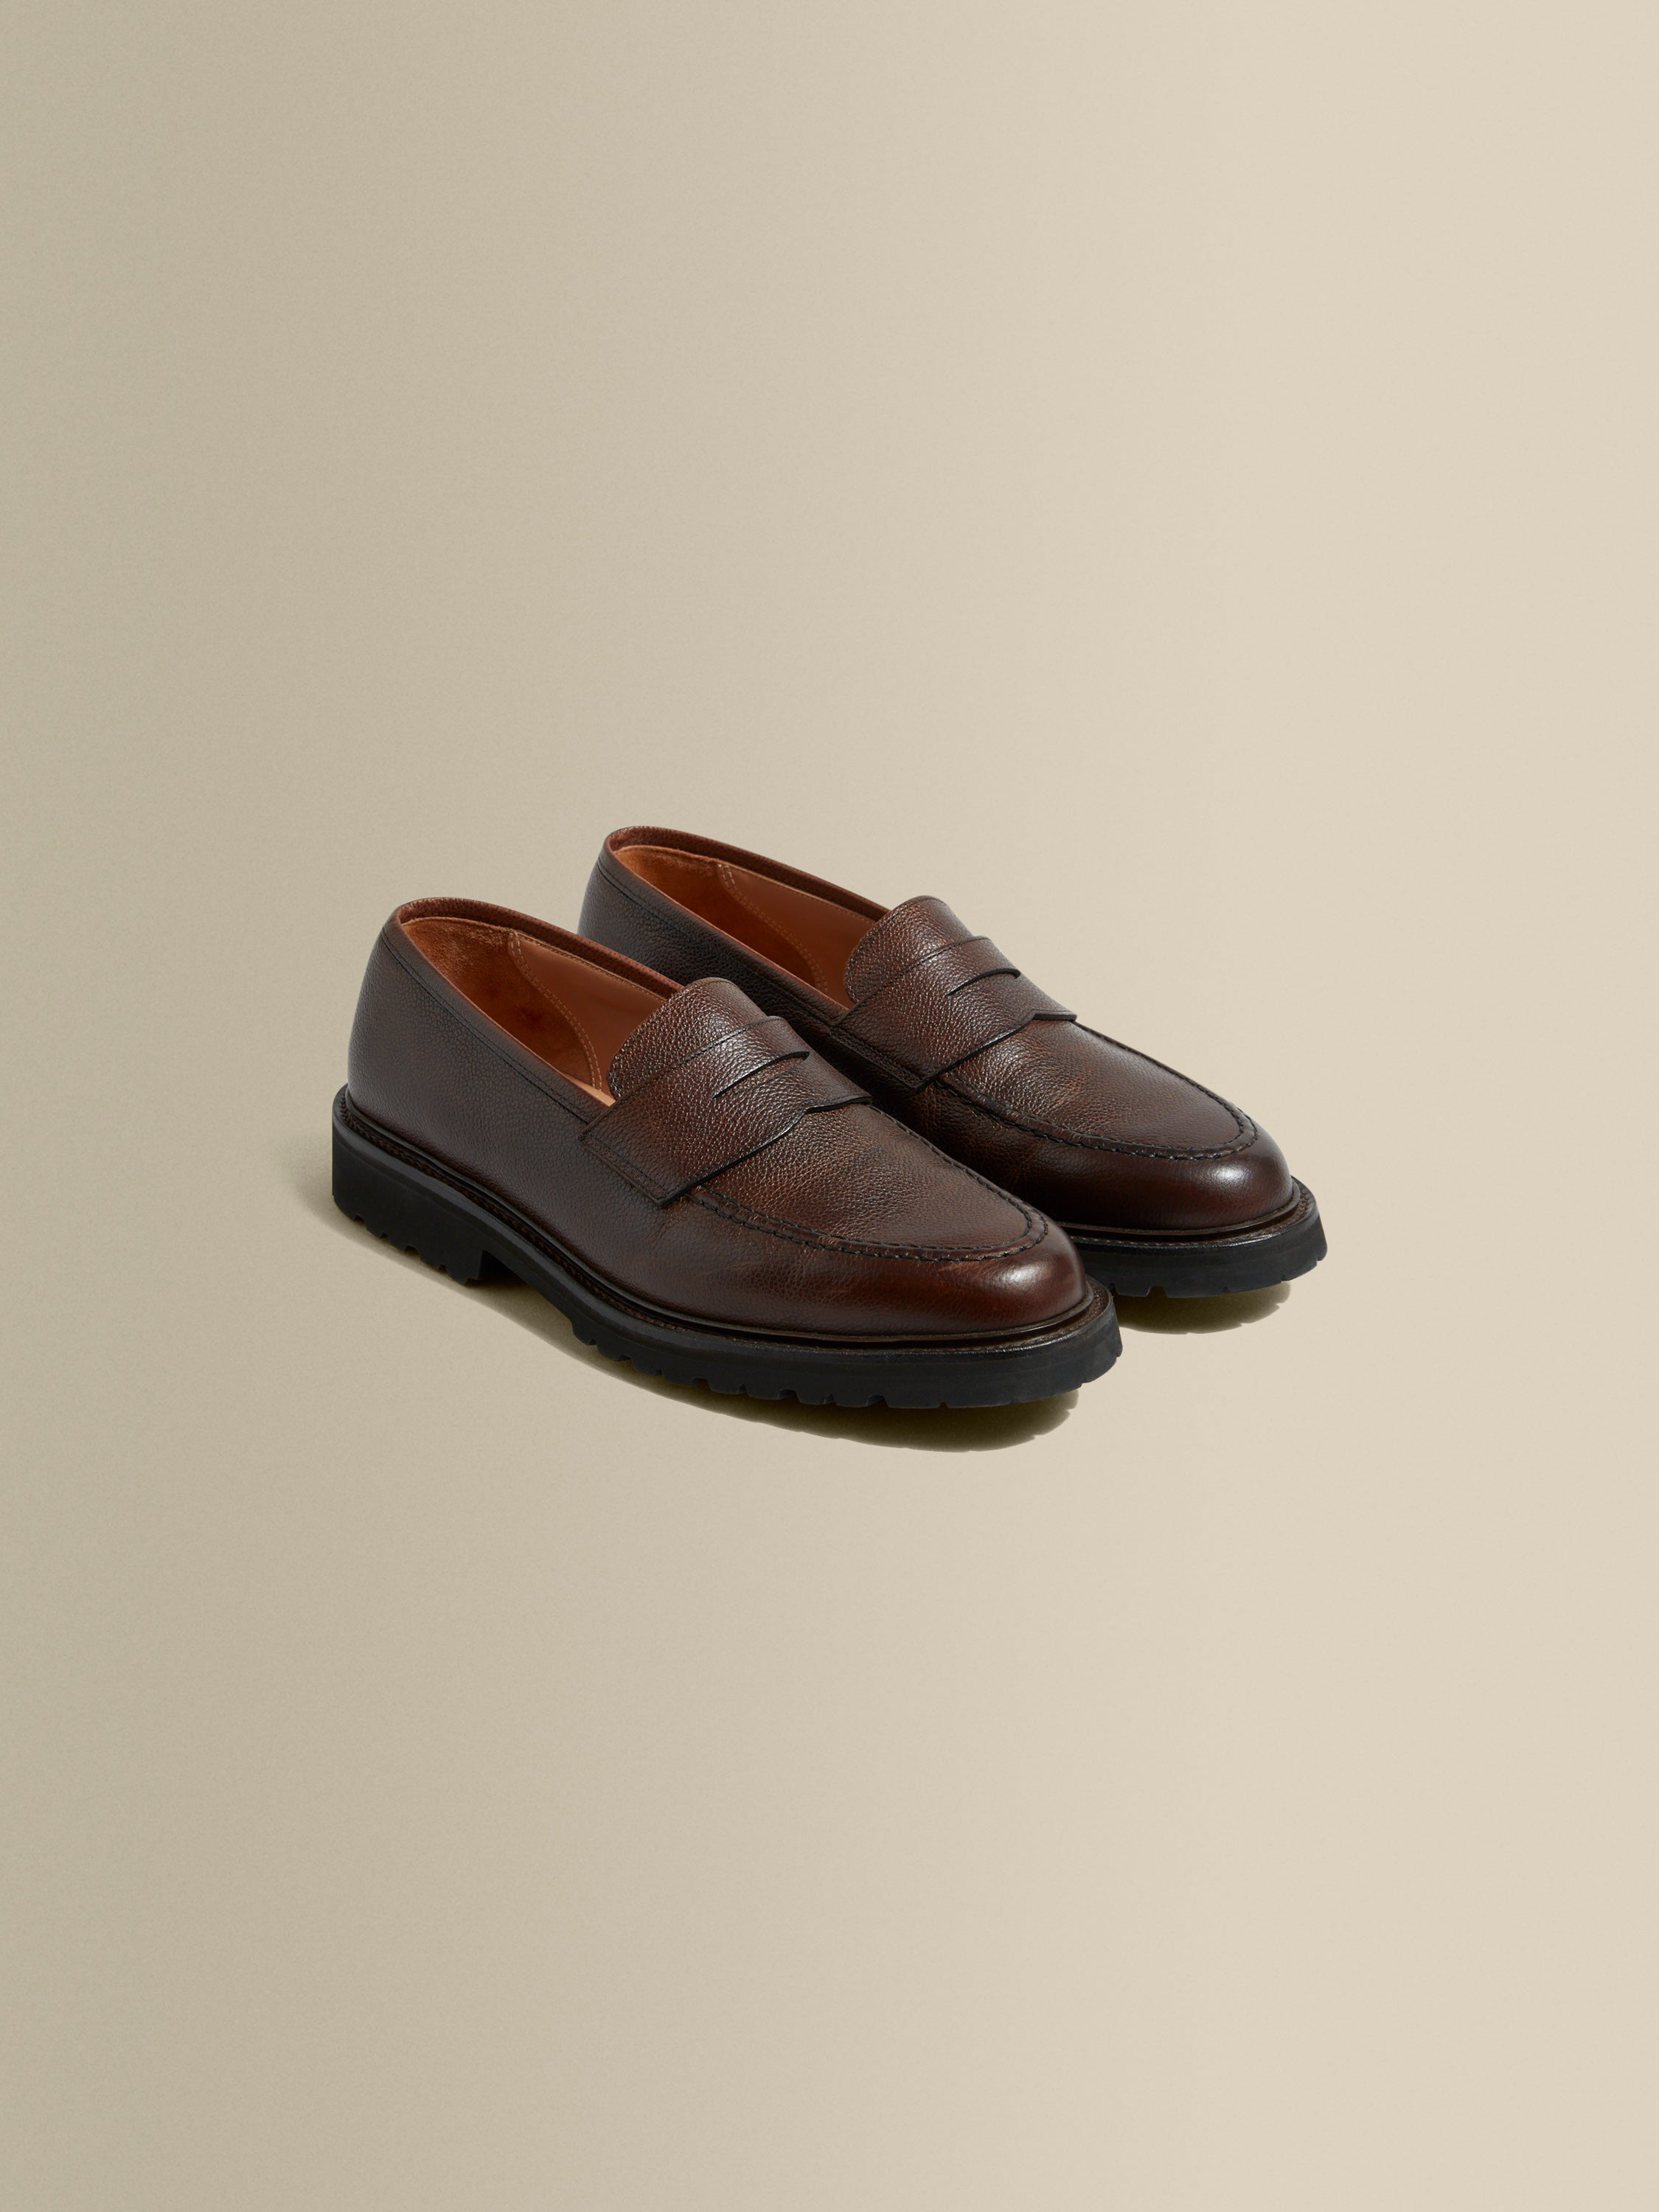 Pebble Grain Leather Penny Loafer Shoes Brown Product Image Pair